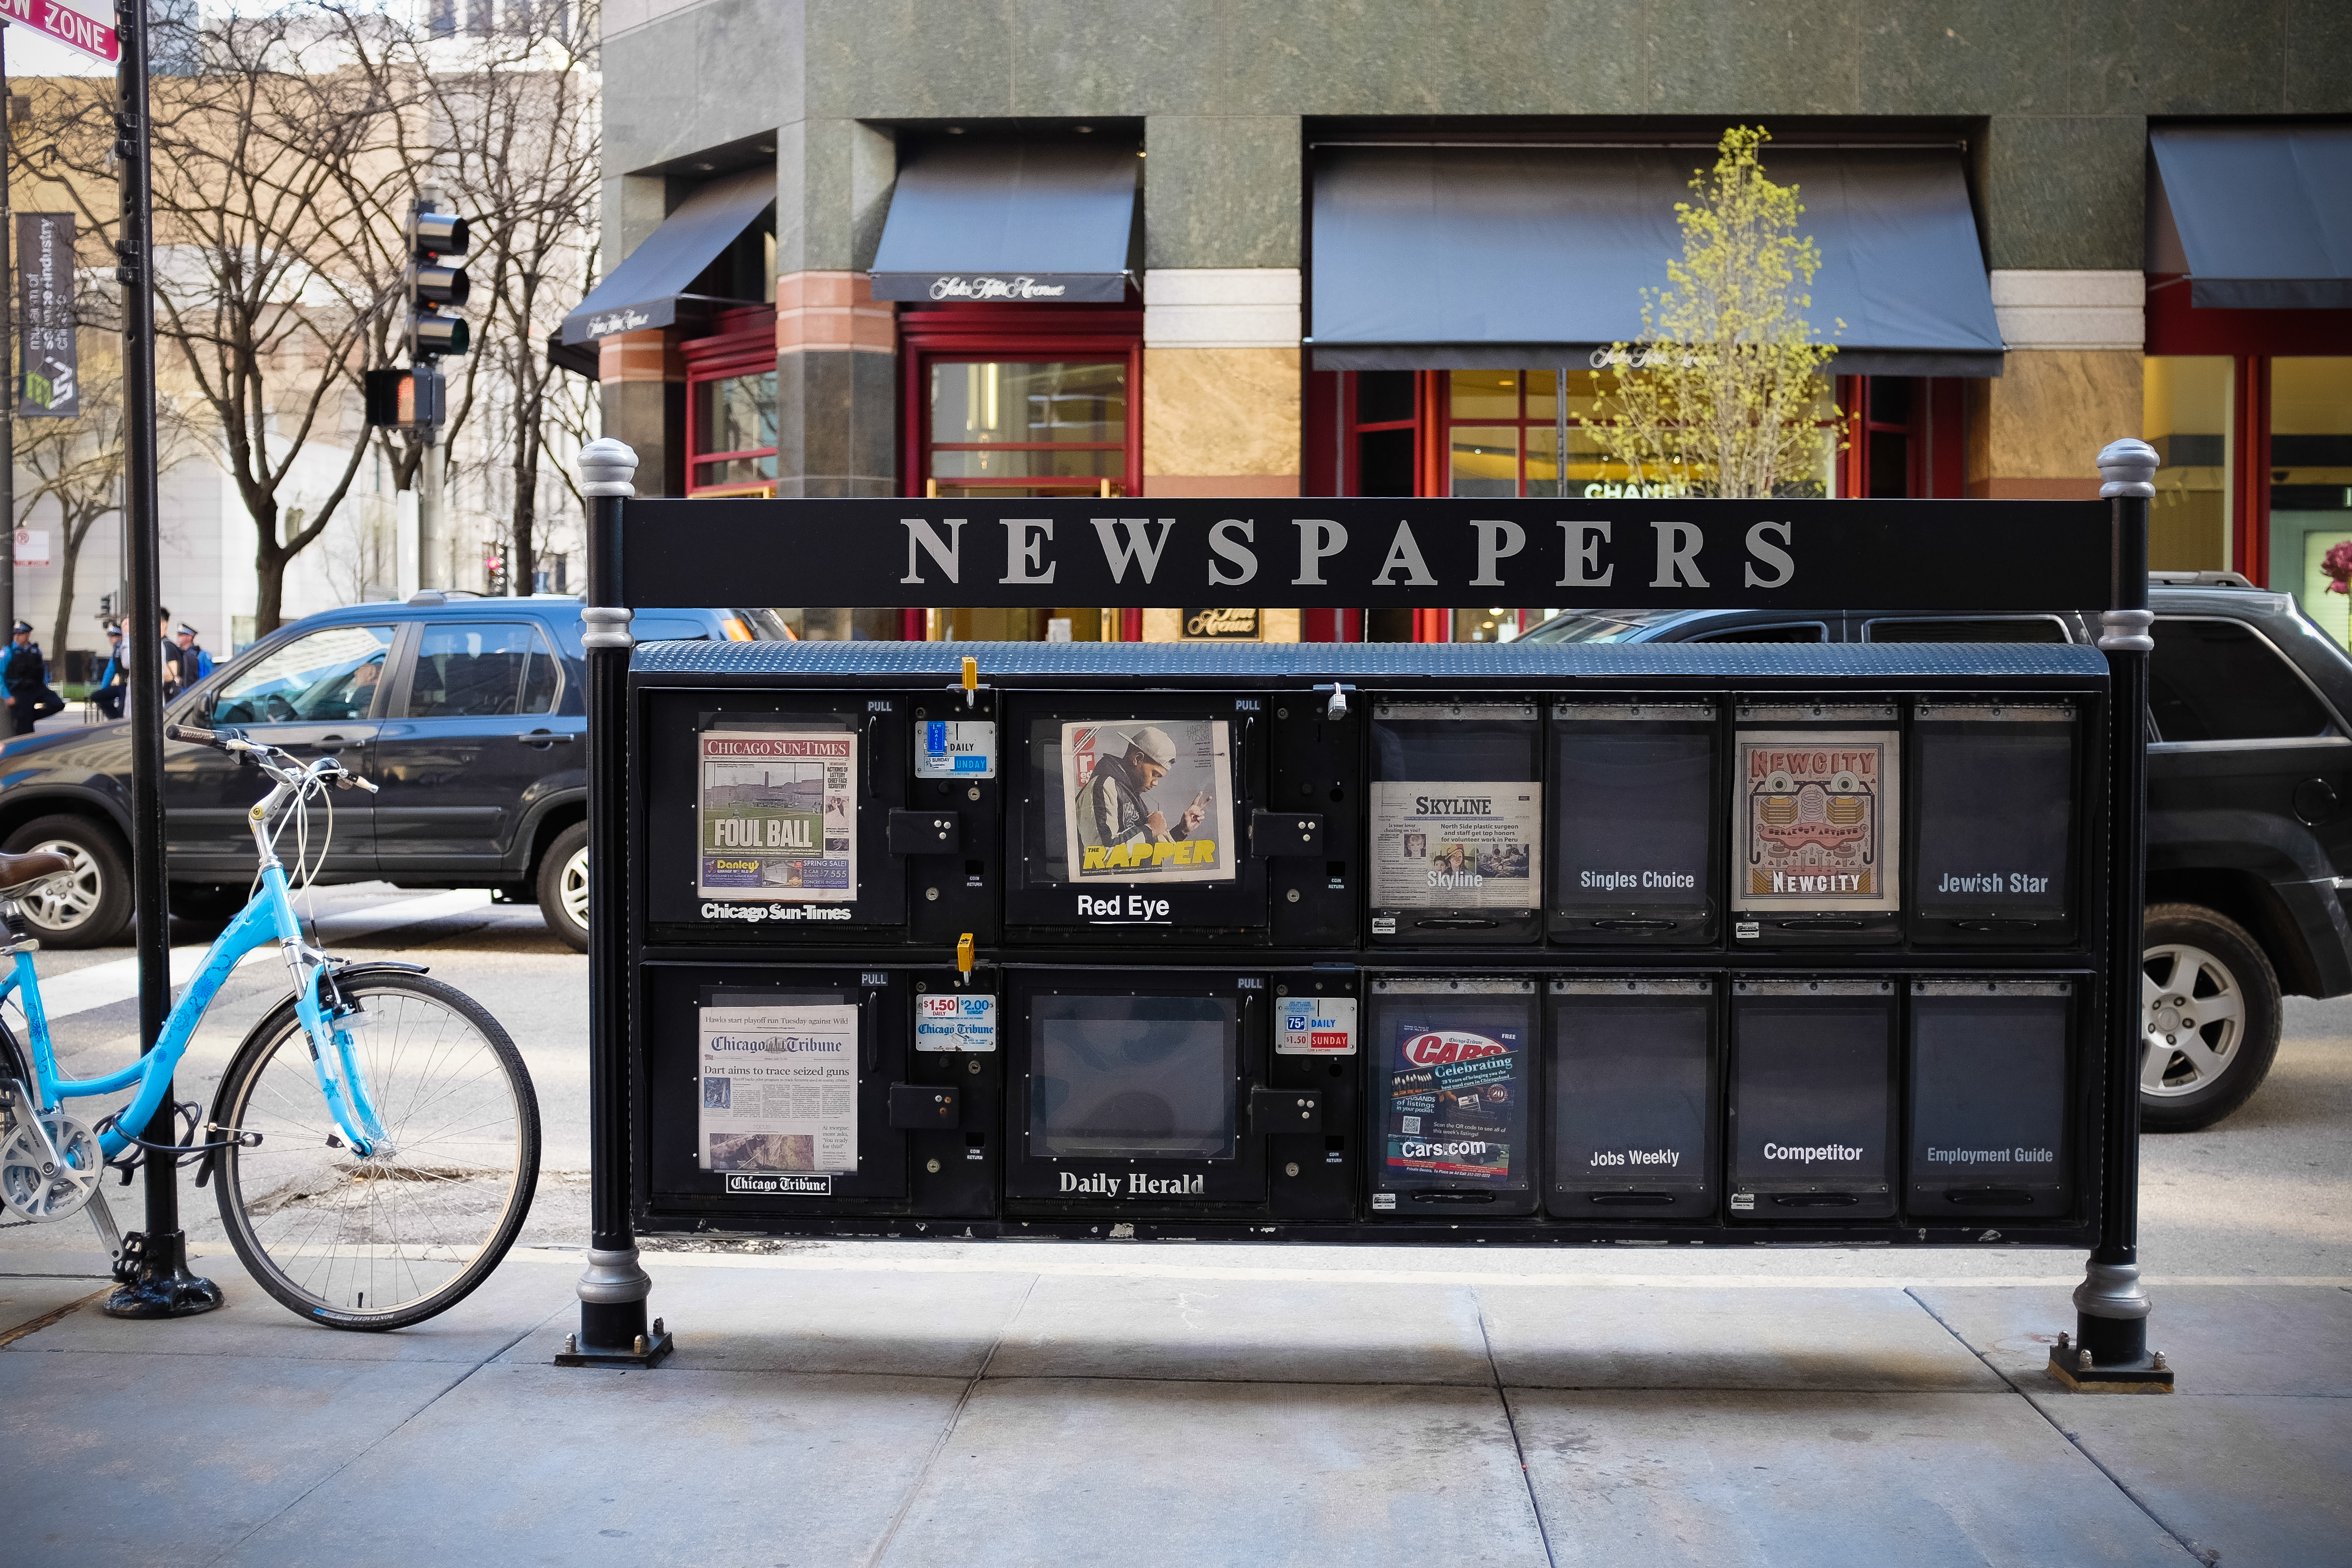 Newspapers in Chicago